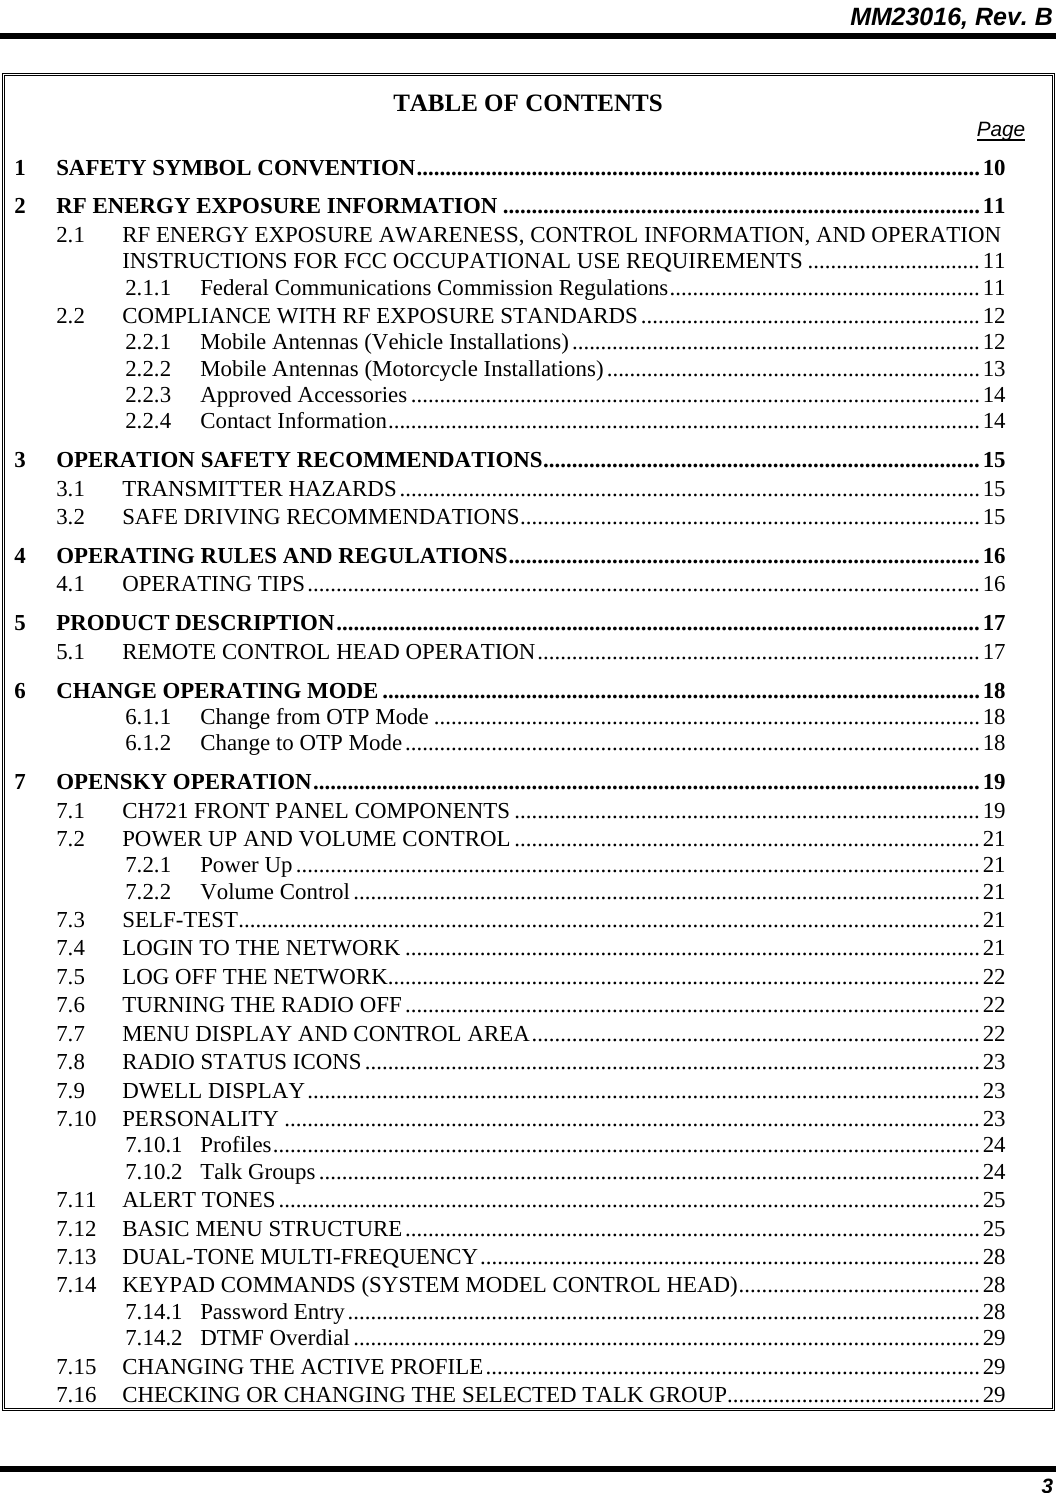 MM23016, Rev. B 3 TABLE OF CONTENTS  Page 1 SAFETY SYMBOL CONVENTION..................................................................................................10 2 RF ENERGY EXPOSURE INFORMATION ...................................................................................11 2.1 RF ENERGY EXPOSURE AWARENESS, CONTROL INFORMATION, AND OPERATION INSTRUCTIONS FOR FCC OCCUPATIONAL USE REQUIREMENTS ..............................11 2.1.1 Federal Communications Commission Regulations......................................................11 2.2 COMPLIANCE WITH RF EXPOSURE STANDARDS...........................................................12 2.2.1 Mobile Antennas (Vehicle Installations).......................................................................12 2.2.2 Mobile Antennas (Motorcycle Installations).................................................................13 2.2.3 Approved Accessories...................................................................................................14 2.2.4 Contact Information.......................................................................................................14 3 OPERATION SAFETY RECOMMENDATIONS............................................................................15 3.1 TRANSMITTER HAZARDS.....................................................................................................15 3.2 SAFE DRIVING RECOMMENDATIONS................................................................................15 4 OPERATING RULES AND REGULATIONS..................................................................................16 4.1 OPERATING TIPS.....................................................................................................................16 5 PRODUCT DESCRIPTION................................................................................................................17 5.1 REMOTE CONTROL HEAD OPERATION.............................................................................17 6 CHANGE OPERATING MODE ........................................................................................................18 6.1.1 Change from OTP Mode ...............................................................................................18 6.1.2 Change to OTP Mode....................................................................................................18 7 OPENSKY OPERATION....................................................................................................................19 7.1 CH721 FRONT PANEL COMPONENTS .................................................................................19 7.2 POWER UP AND VOLUME CONTROL .................................................................................21 7.2.1 Power Up.......................................................................................................................21 7.2.2 Volume Control.............................................................................................................21 7.3 SELF-TEST.................................................................................................................................21 7.4 LOGIN TO THE NETWORK ....................................................................................................21 7.5 LOG OFF THE NETWORK.......................................................................................................22 7.6 TURNING THE RADIO OFF....................................................................................................22 7.7 MENU DISPLAY AND CONTROL AREA..............................................................................22 7.8 RADIO STATUS ICONS...........................................................................................................23 7.9 DWELL DISPLAY.....................................................................................................................23 7.10 PERSONALITY .........................................................................................................................23 7.10.1 Profiles...........................................................................................................................24 7.10.2 Talk Groups...................................................................................................................24 7.11 ALERT TONES..........................................................................................................................25 7.12 BASIC MENU STRUCTURE....................................................................................................25 7.13 DUAL-TONE MULTI-FREQUENCY.......................................................................................28 7.14 KEYPAD COMMANDS (SYSTEM MODEL CONTROL HEAD)..........................................28 7.14.1 Password Entry..............................................................................................................28 7.14.2 DTMF Overdial.............................................................................................................29 7.15 CHANGING THE ACTIVE PROFILE......................................................................................29 7.16 CHECKING OR CHANGING THE SELECTED TALK GROUP............................................29 